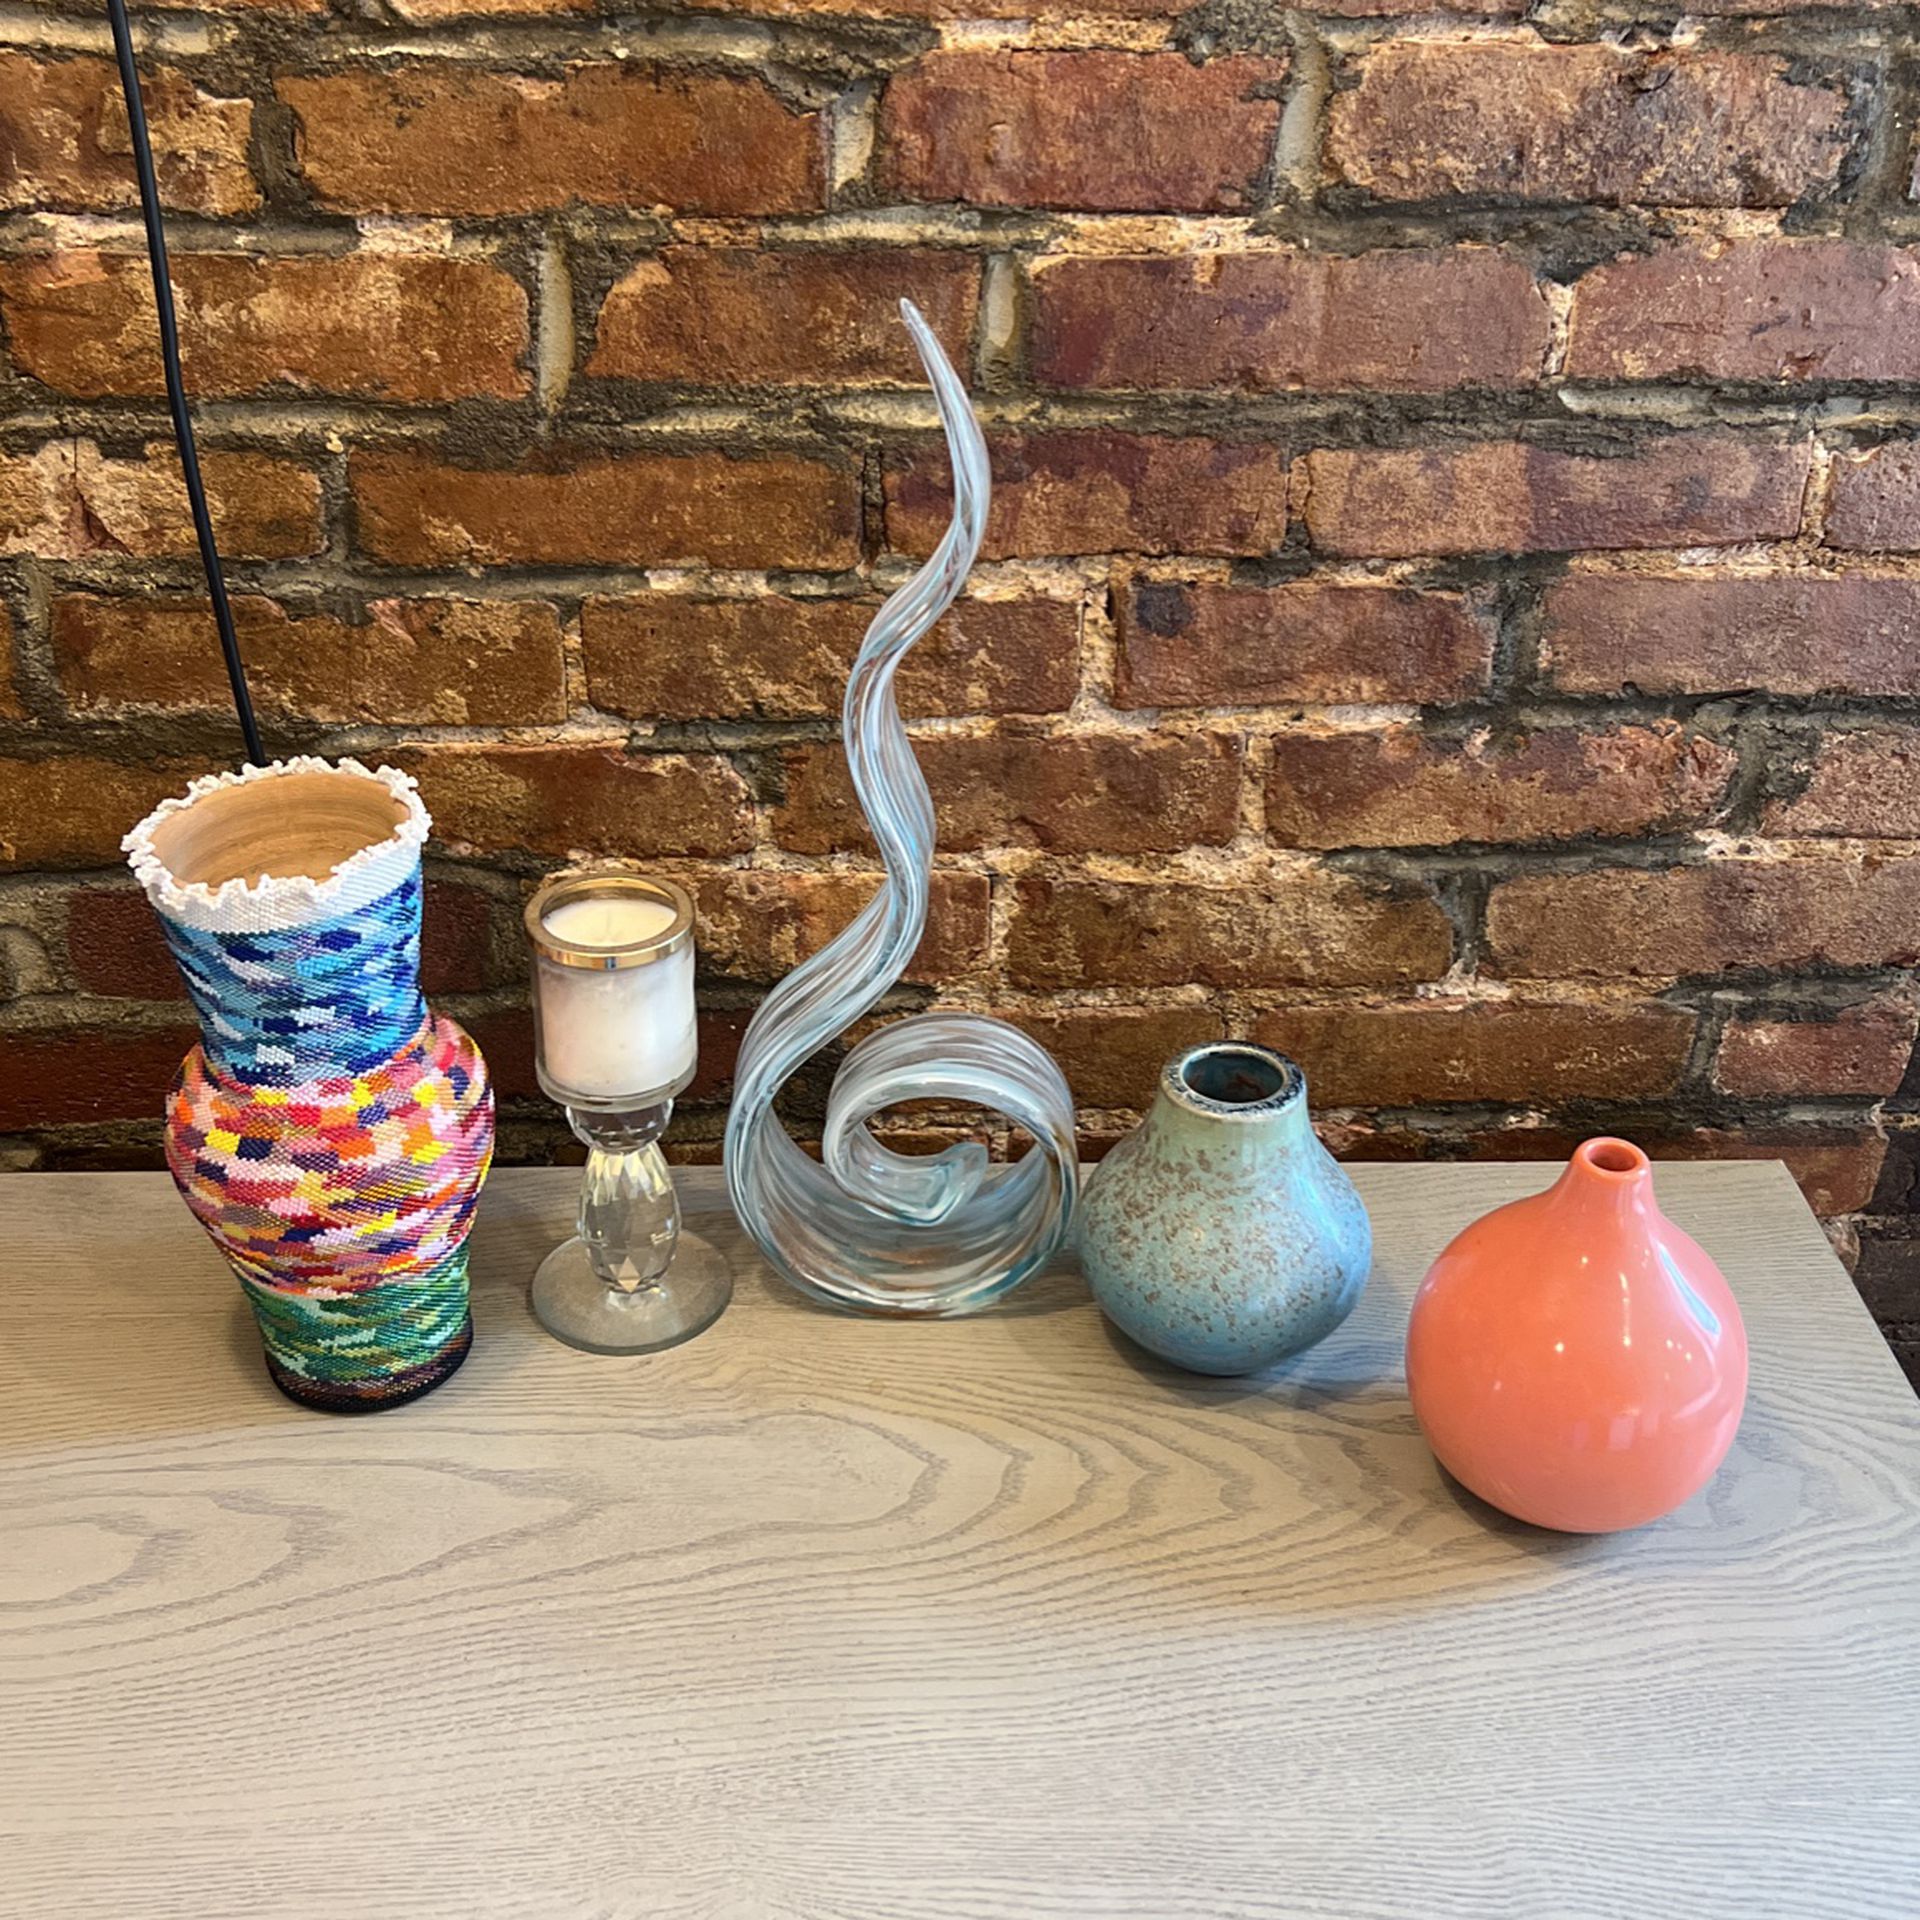 Vases/decor (prices listed) - Pick Up East Village 